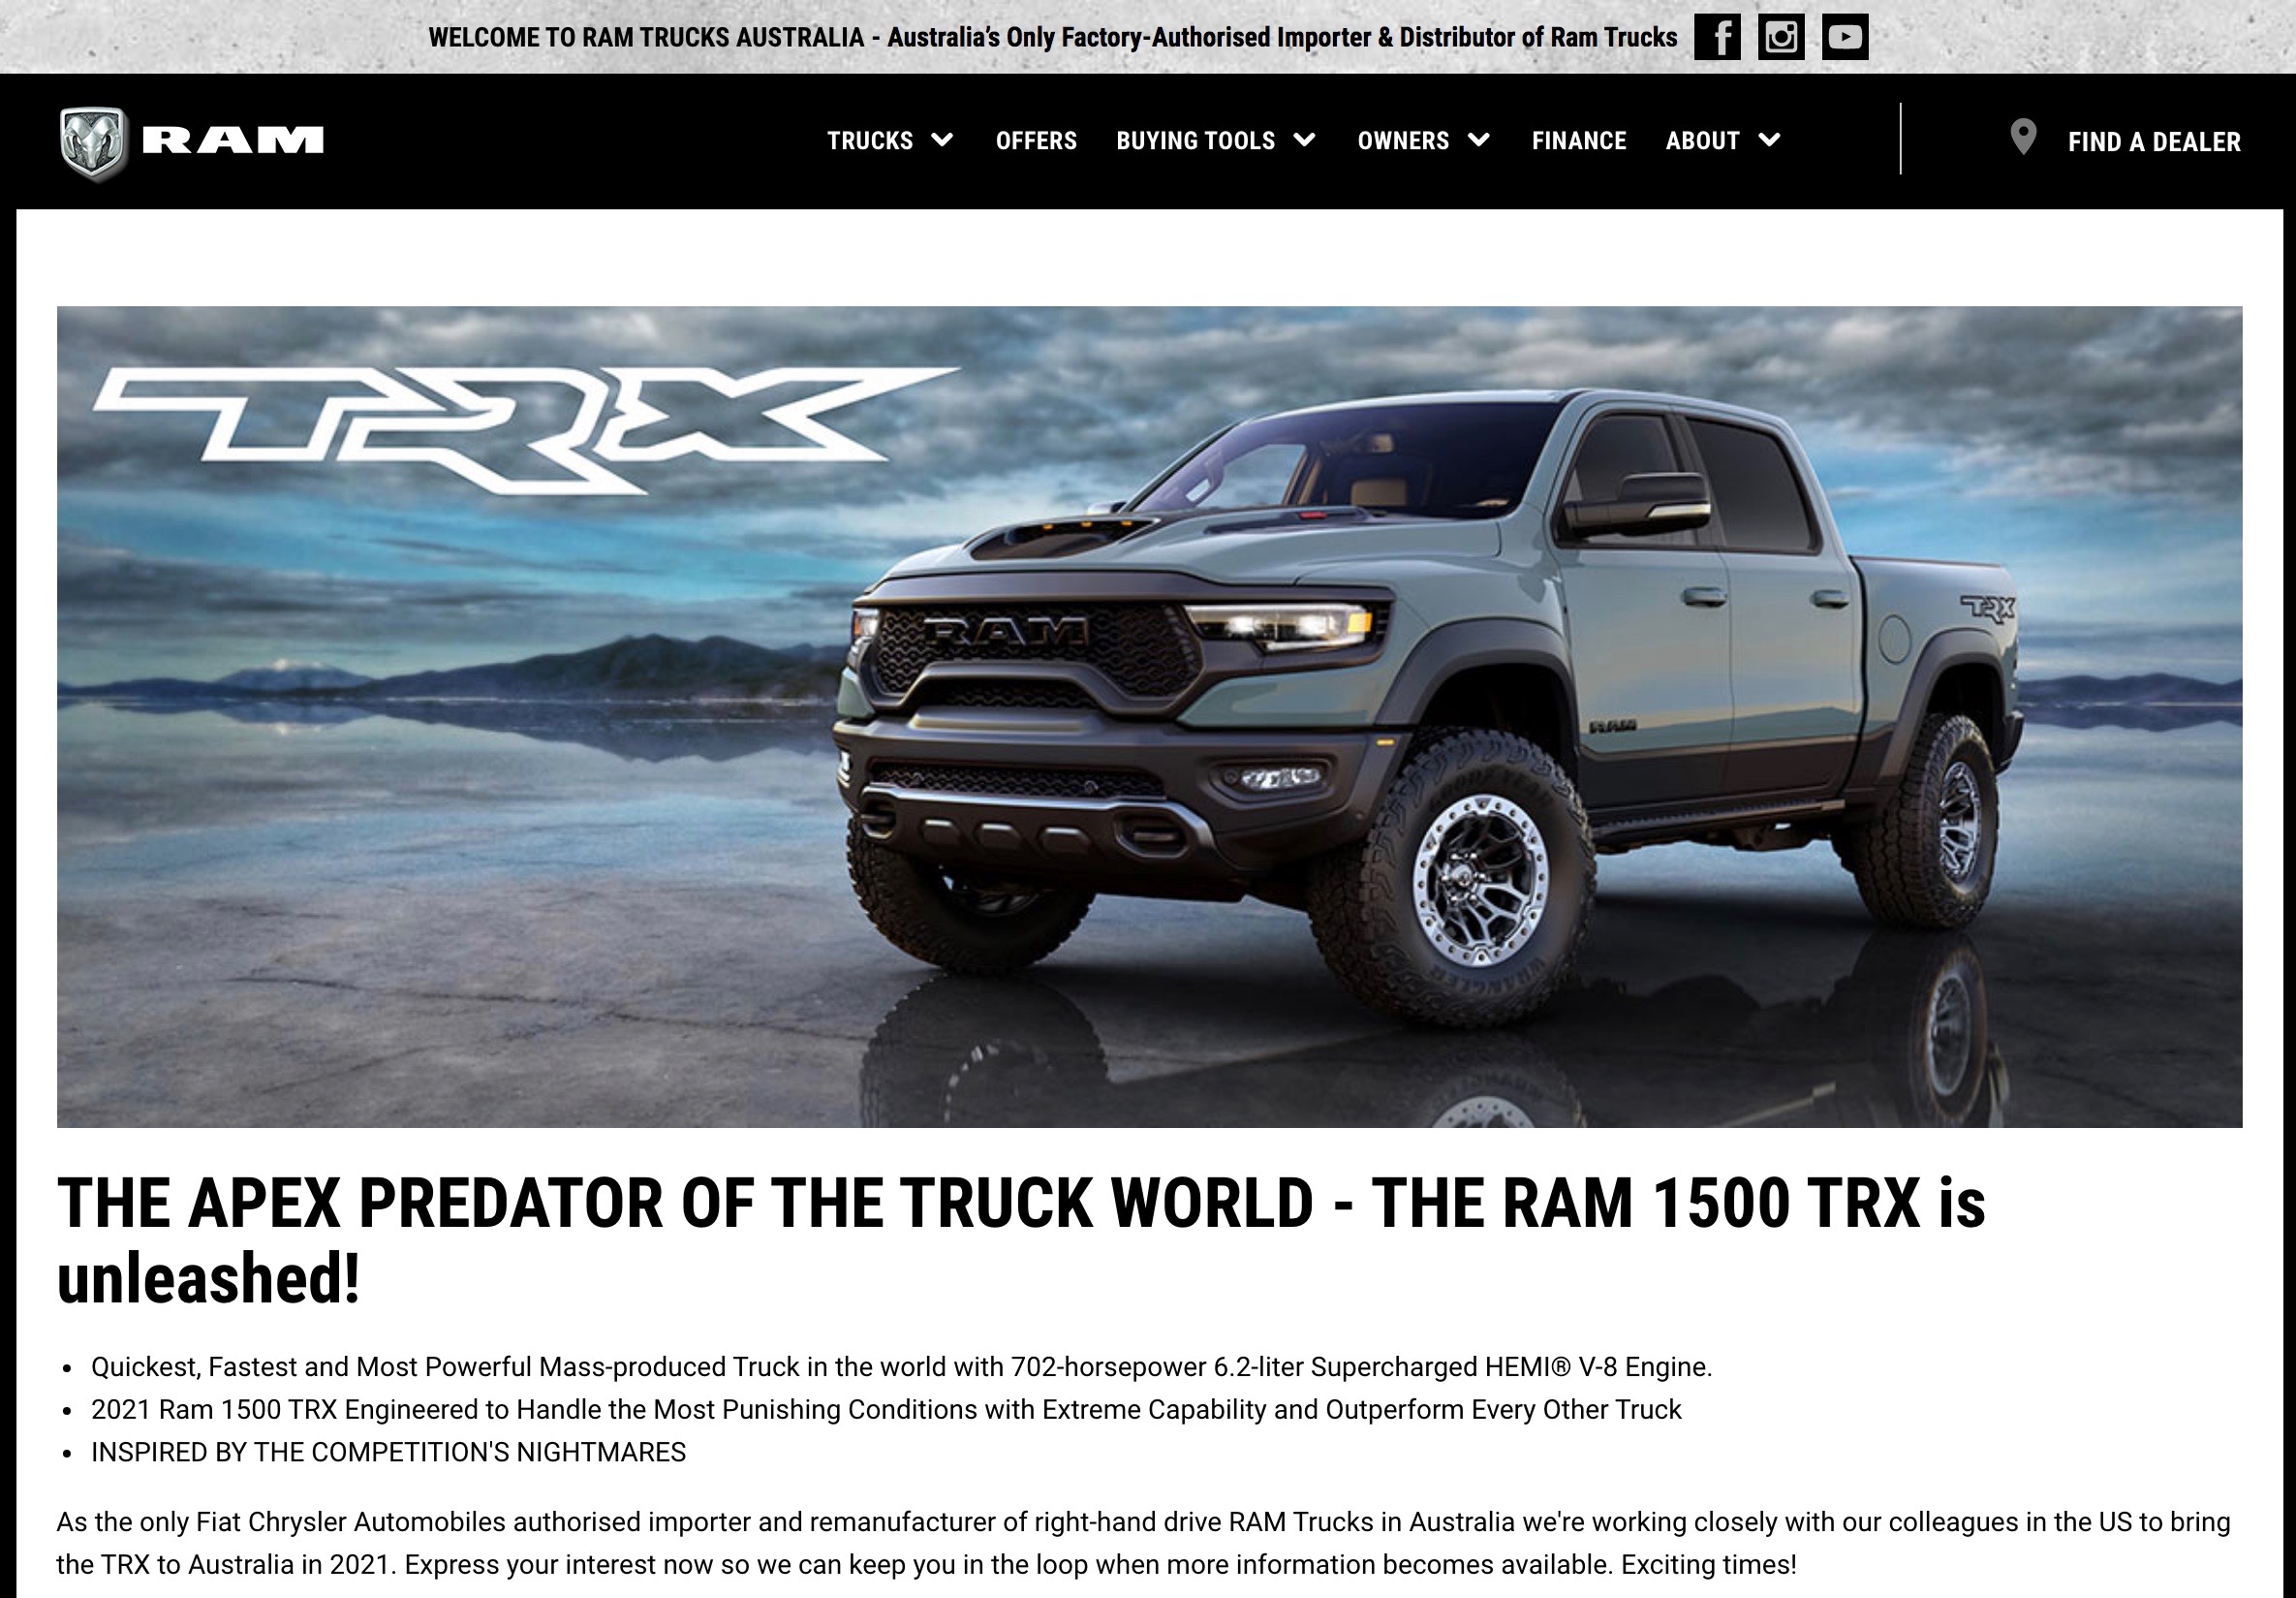 2021 RAM 1500 TRX 'Hellcat' for Australia, to arrive later this year - PerformanceDrive